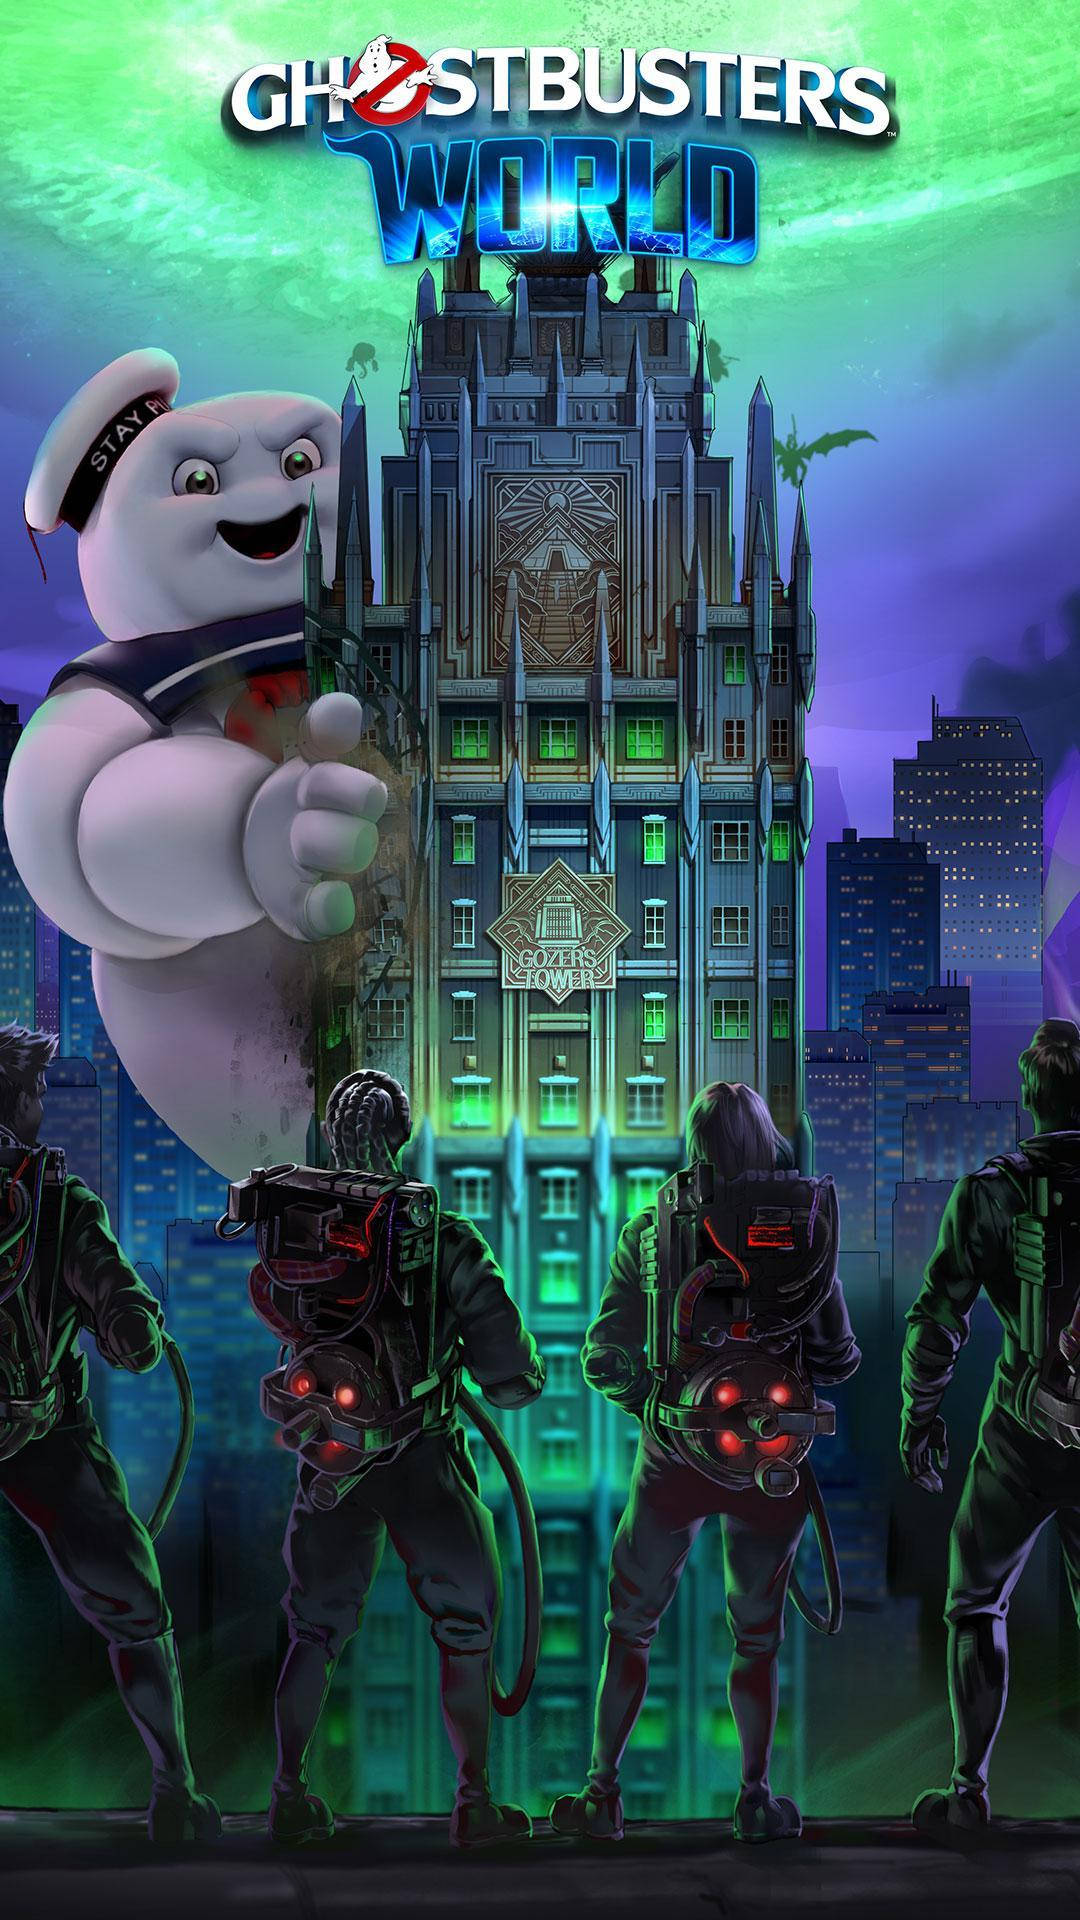 'Be Ready - Ghostbusters are Here!' Wallpaper